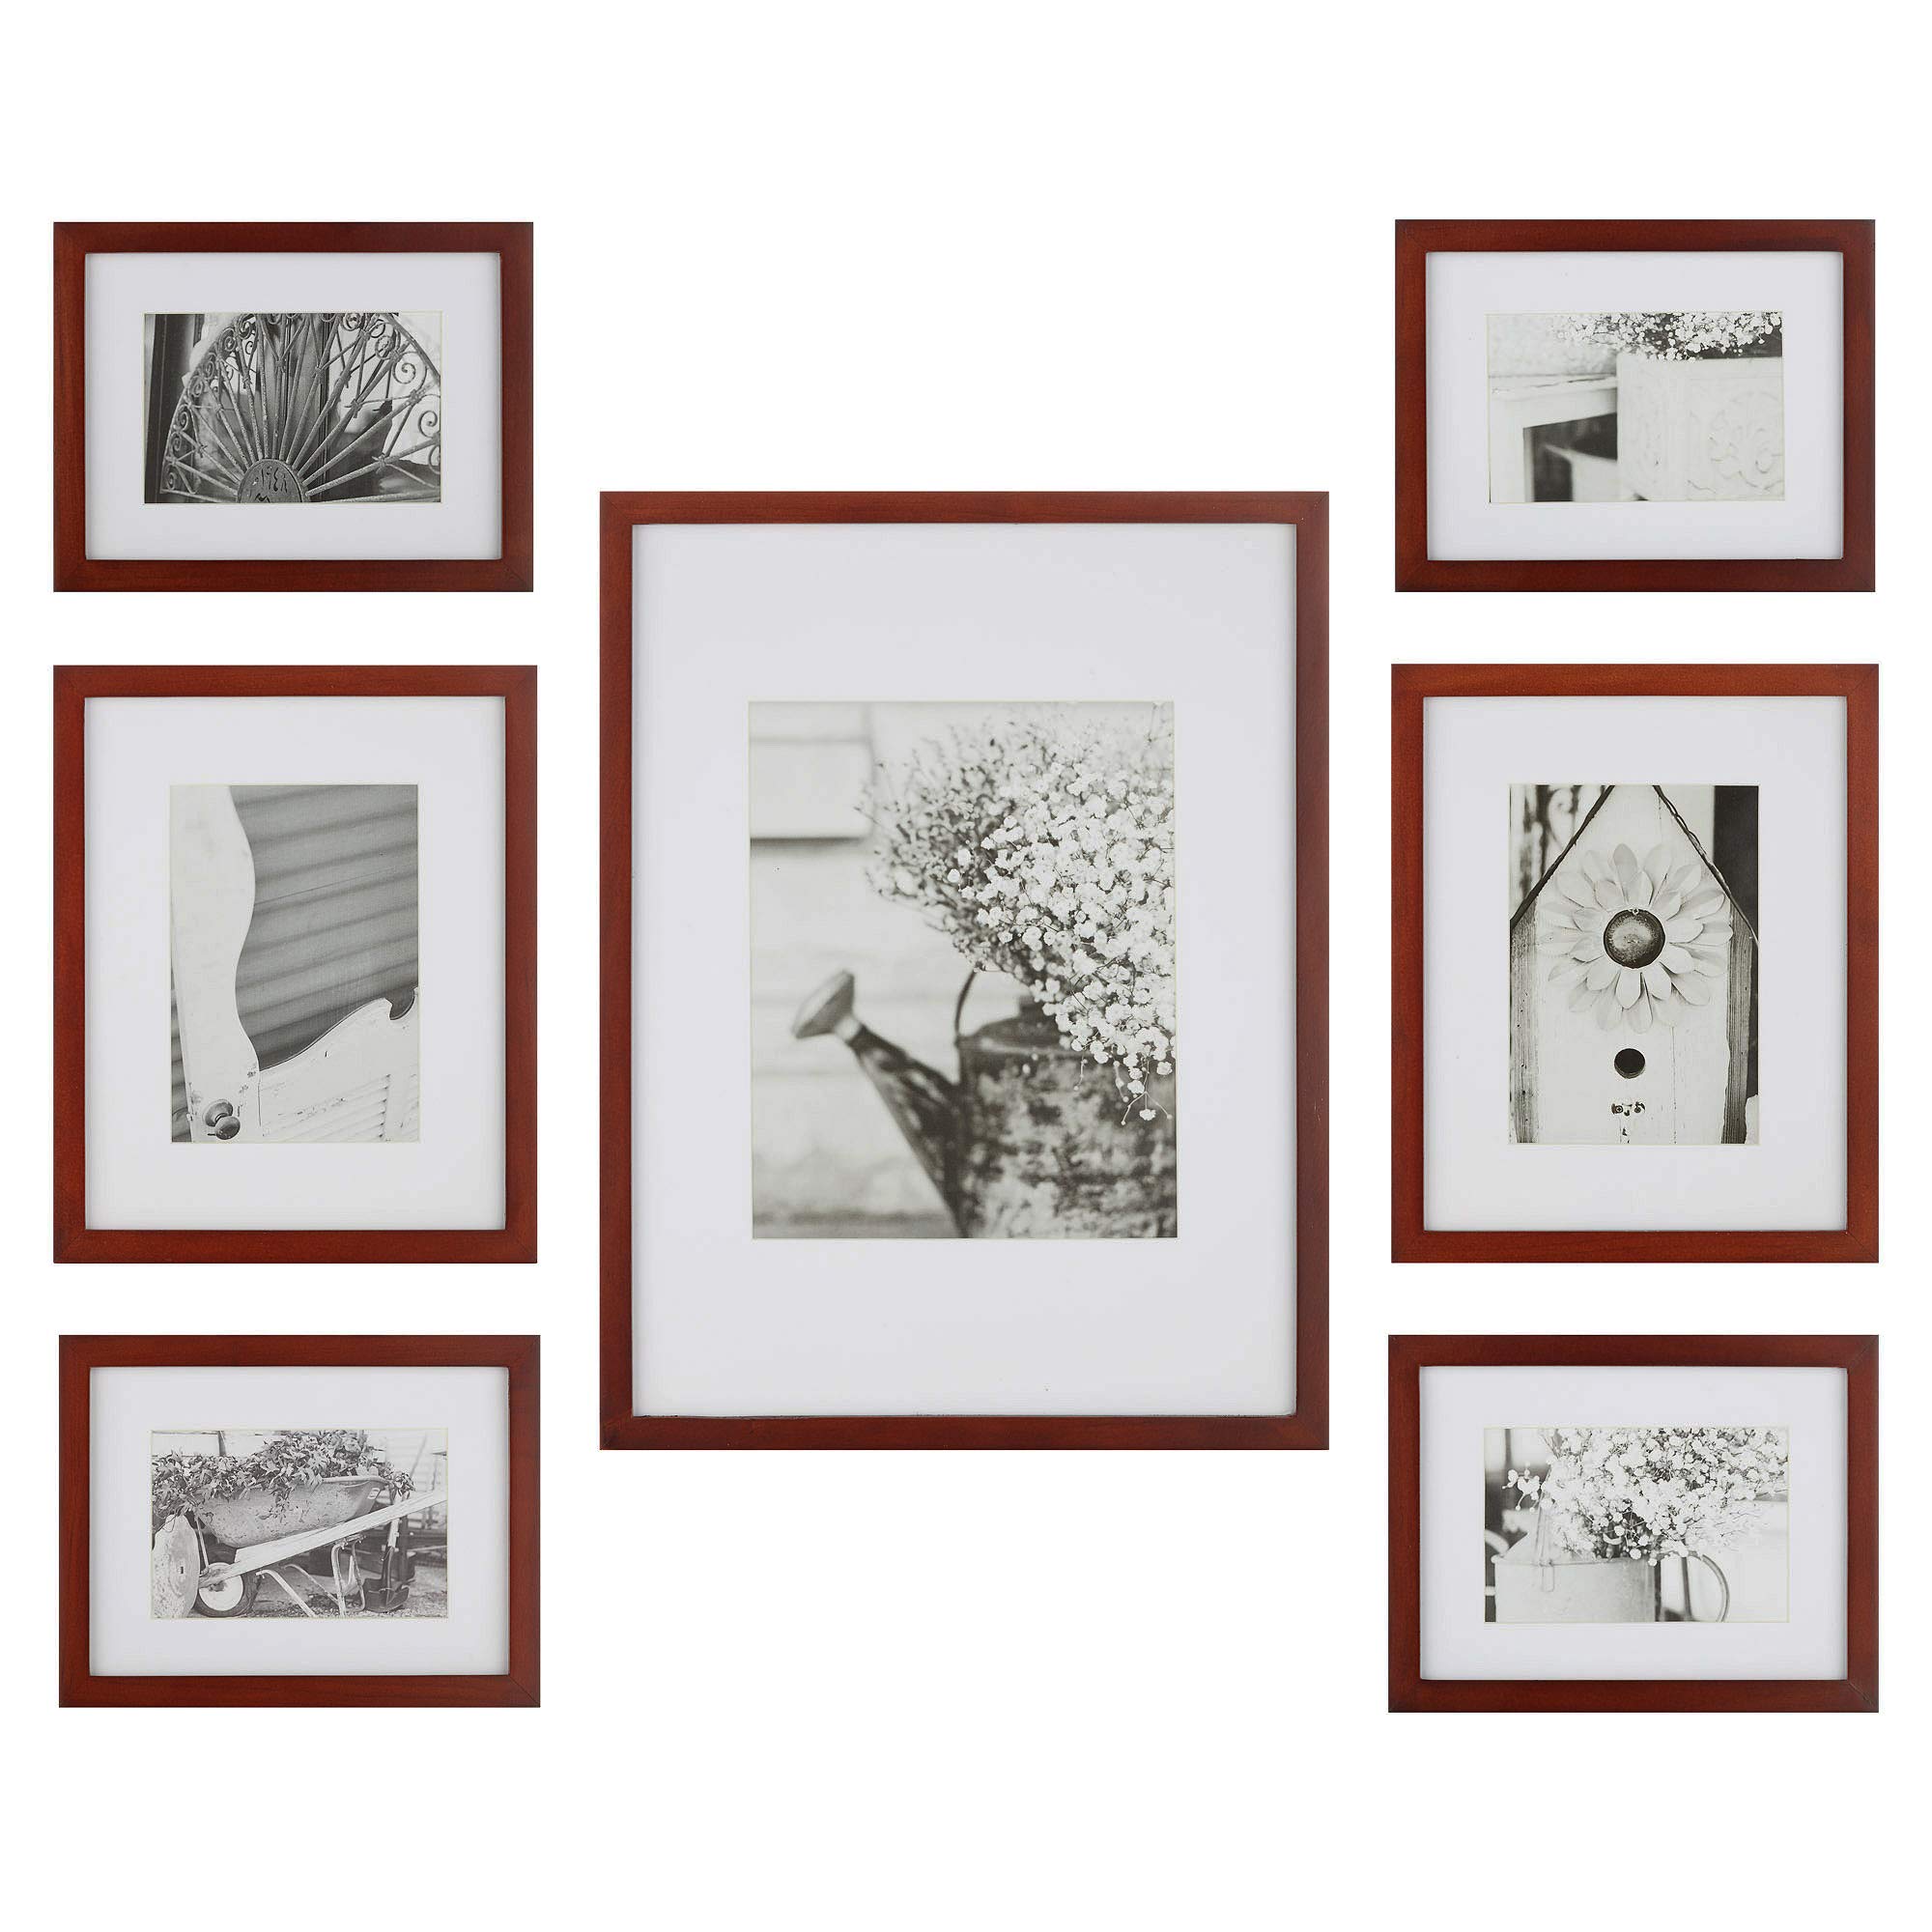 Gallery Perfect 7 Piece Walnut Gallery Wall Kit Picture Frame Set With Decorative Art Prints & Hanging Template, Multi-Size